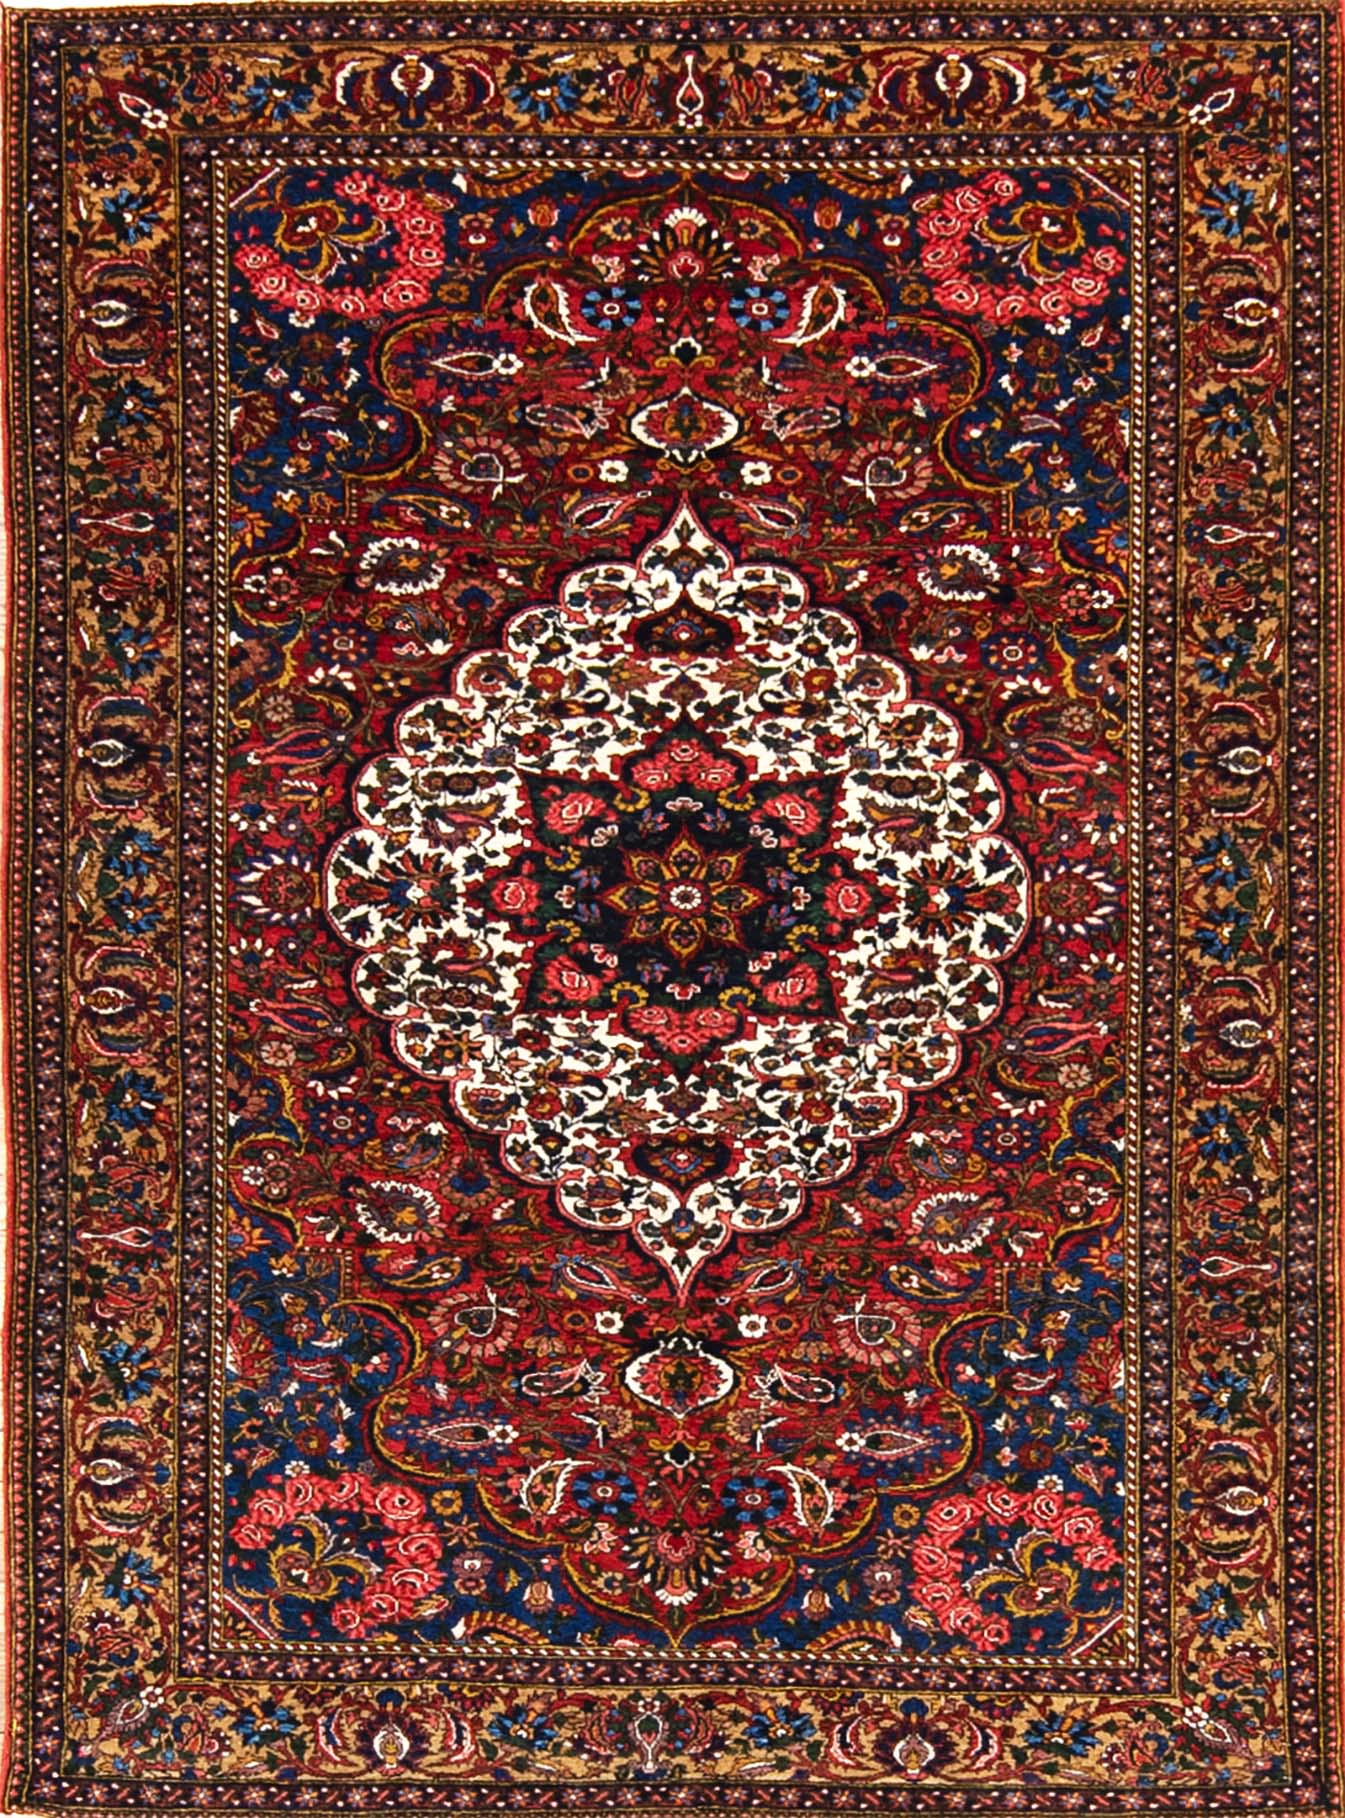 Small Persian rug. Antique Persian Bakhtiari rug in red color made of premium quality wool and natural dye. Size 5x7.